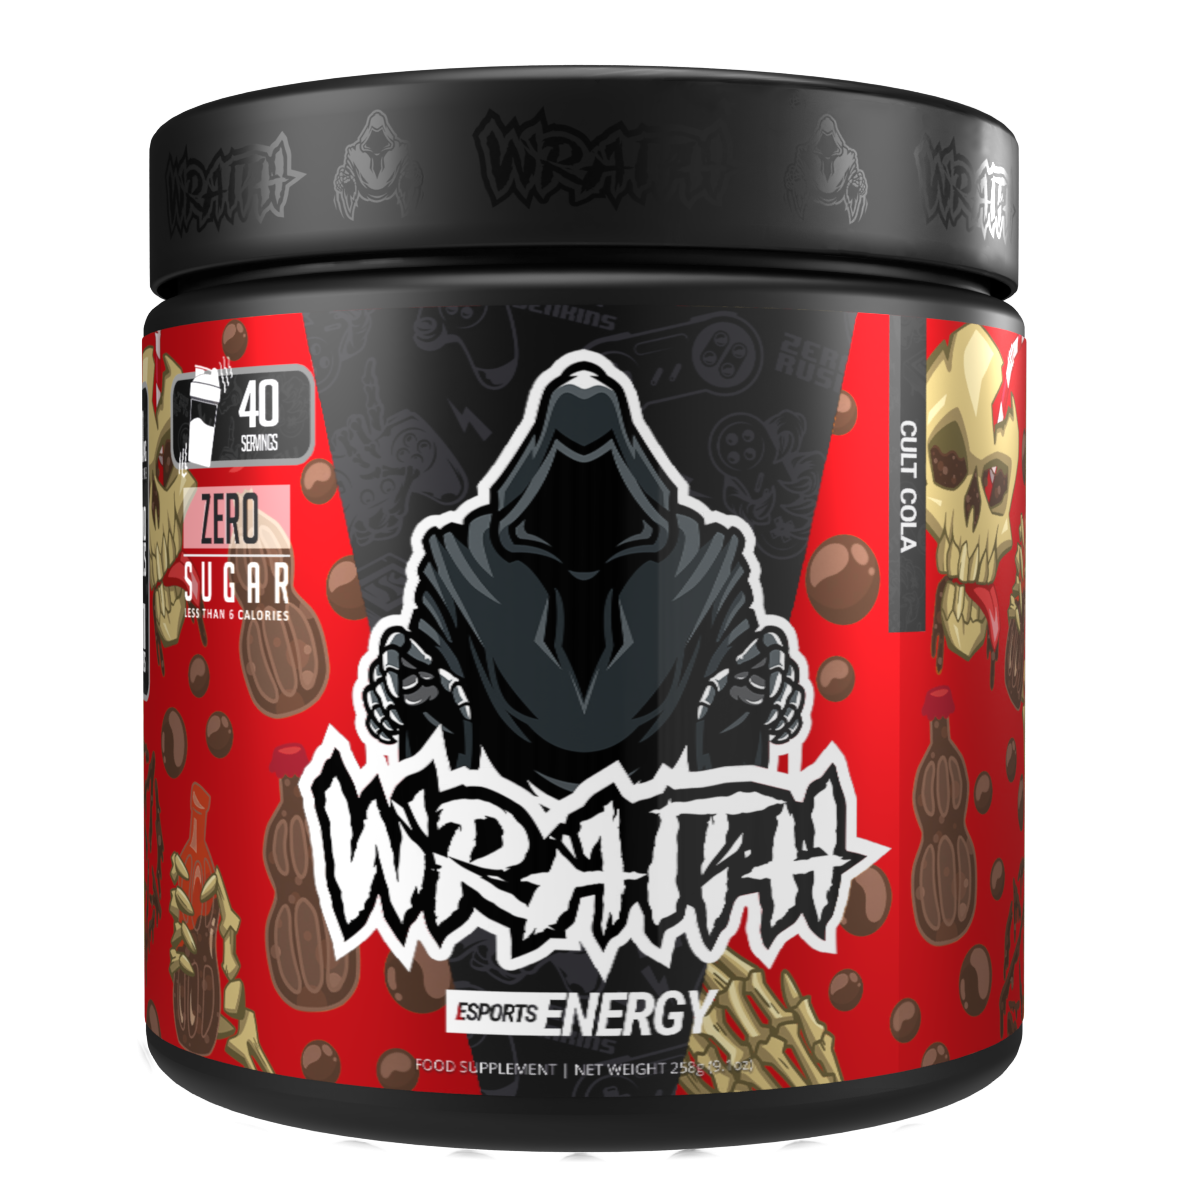 Wraith® Crates - The Ultimate Gaming Energy Drink Starter Pack – Wraith ...